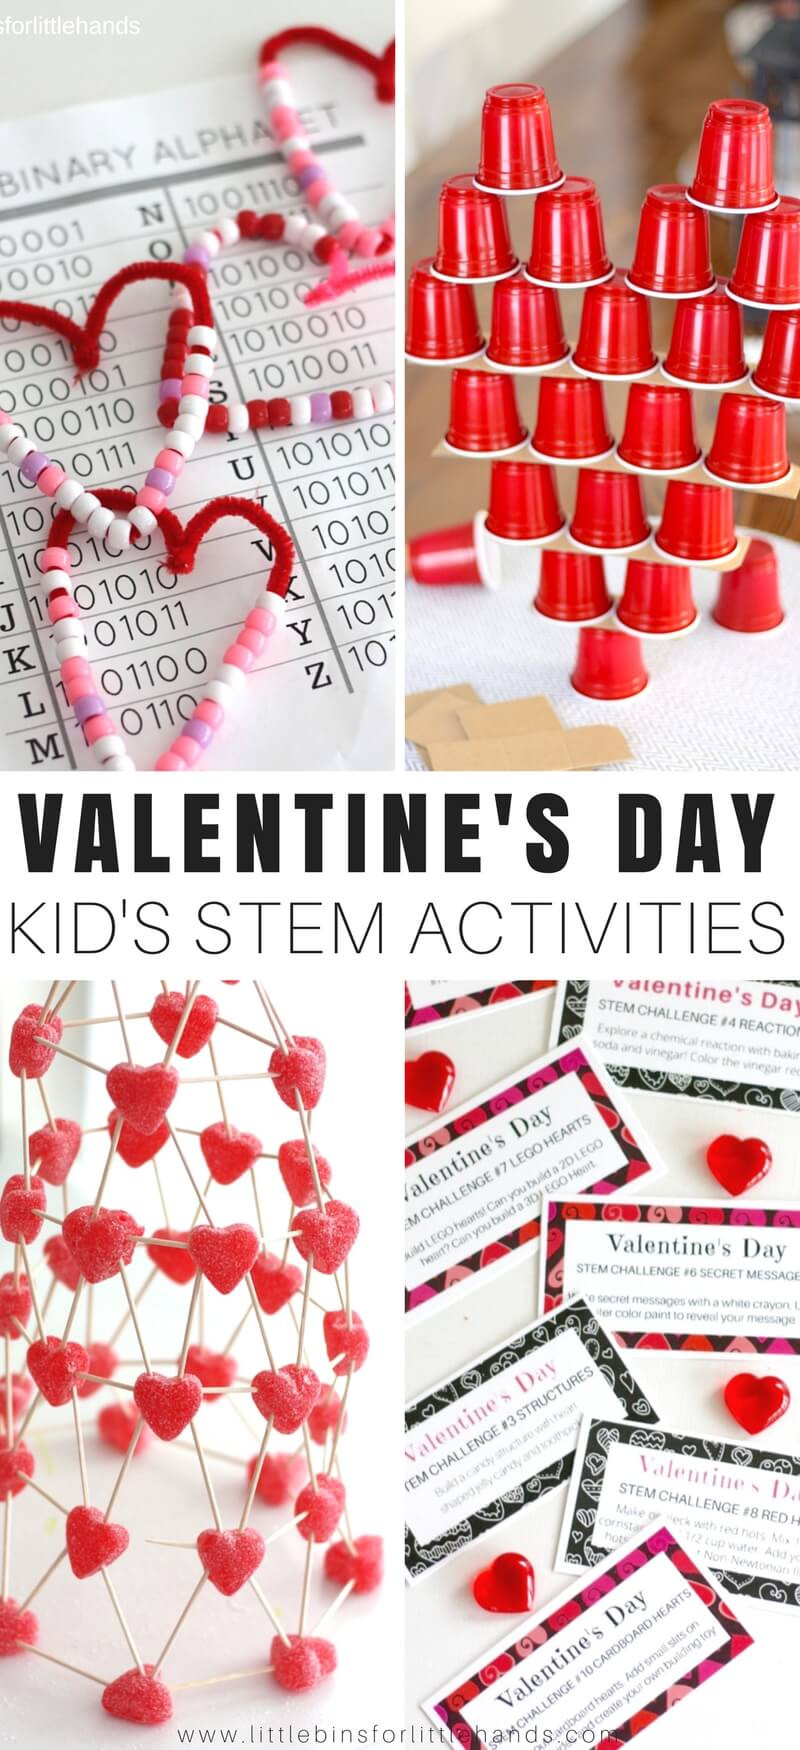 Valentines Day Activities
 Valentines Day STEM Activities and Challenges for Kids